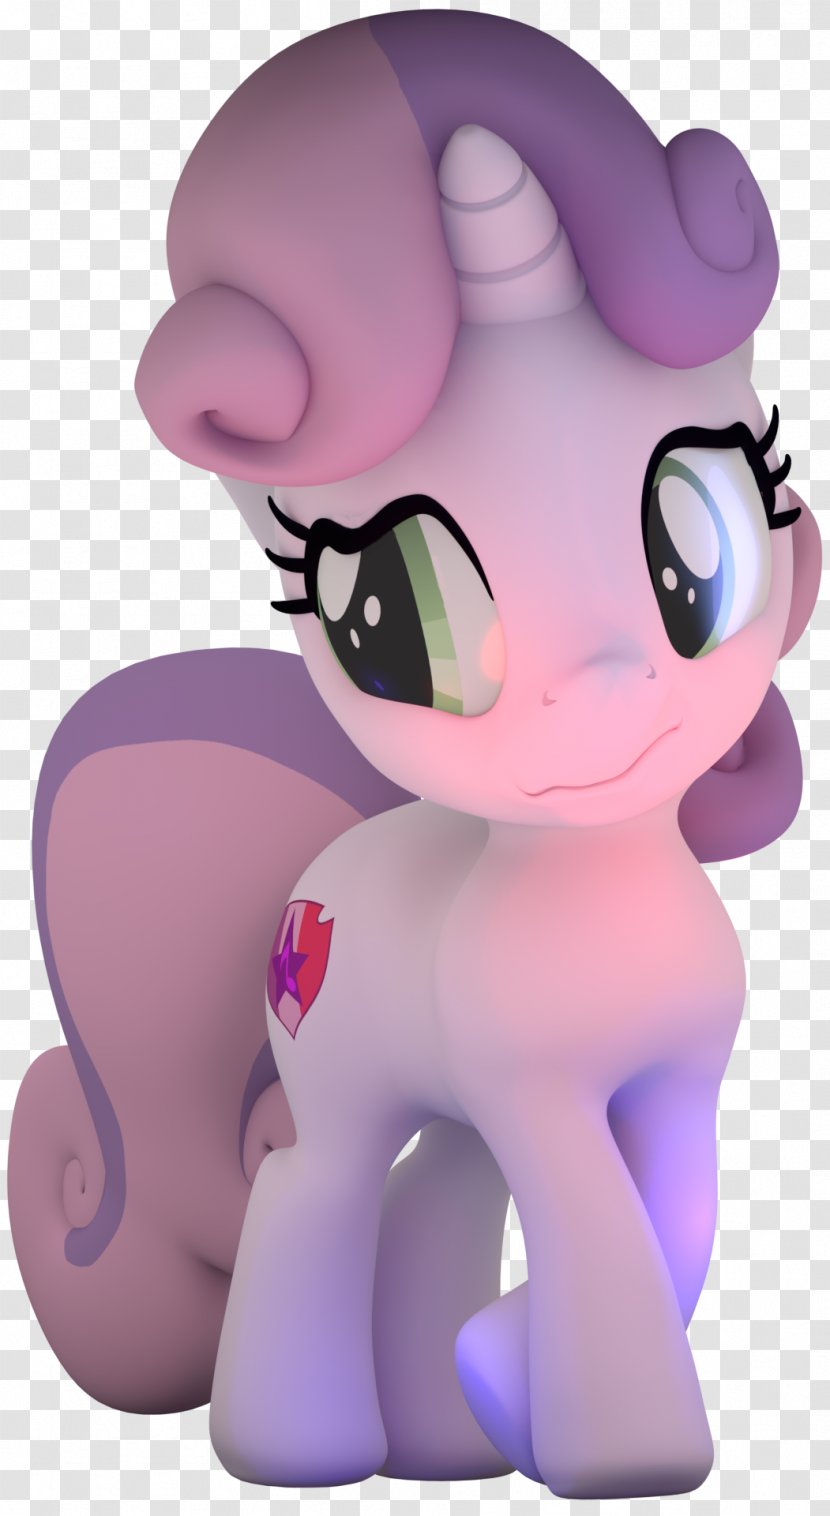 Blender Pony Rendering Low Poly Polygon Mesh - Frame - 3d Small People Transparent PNG